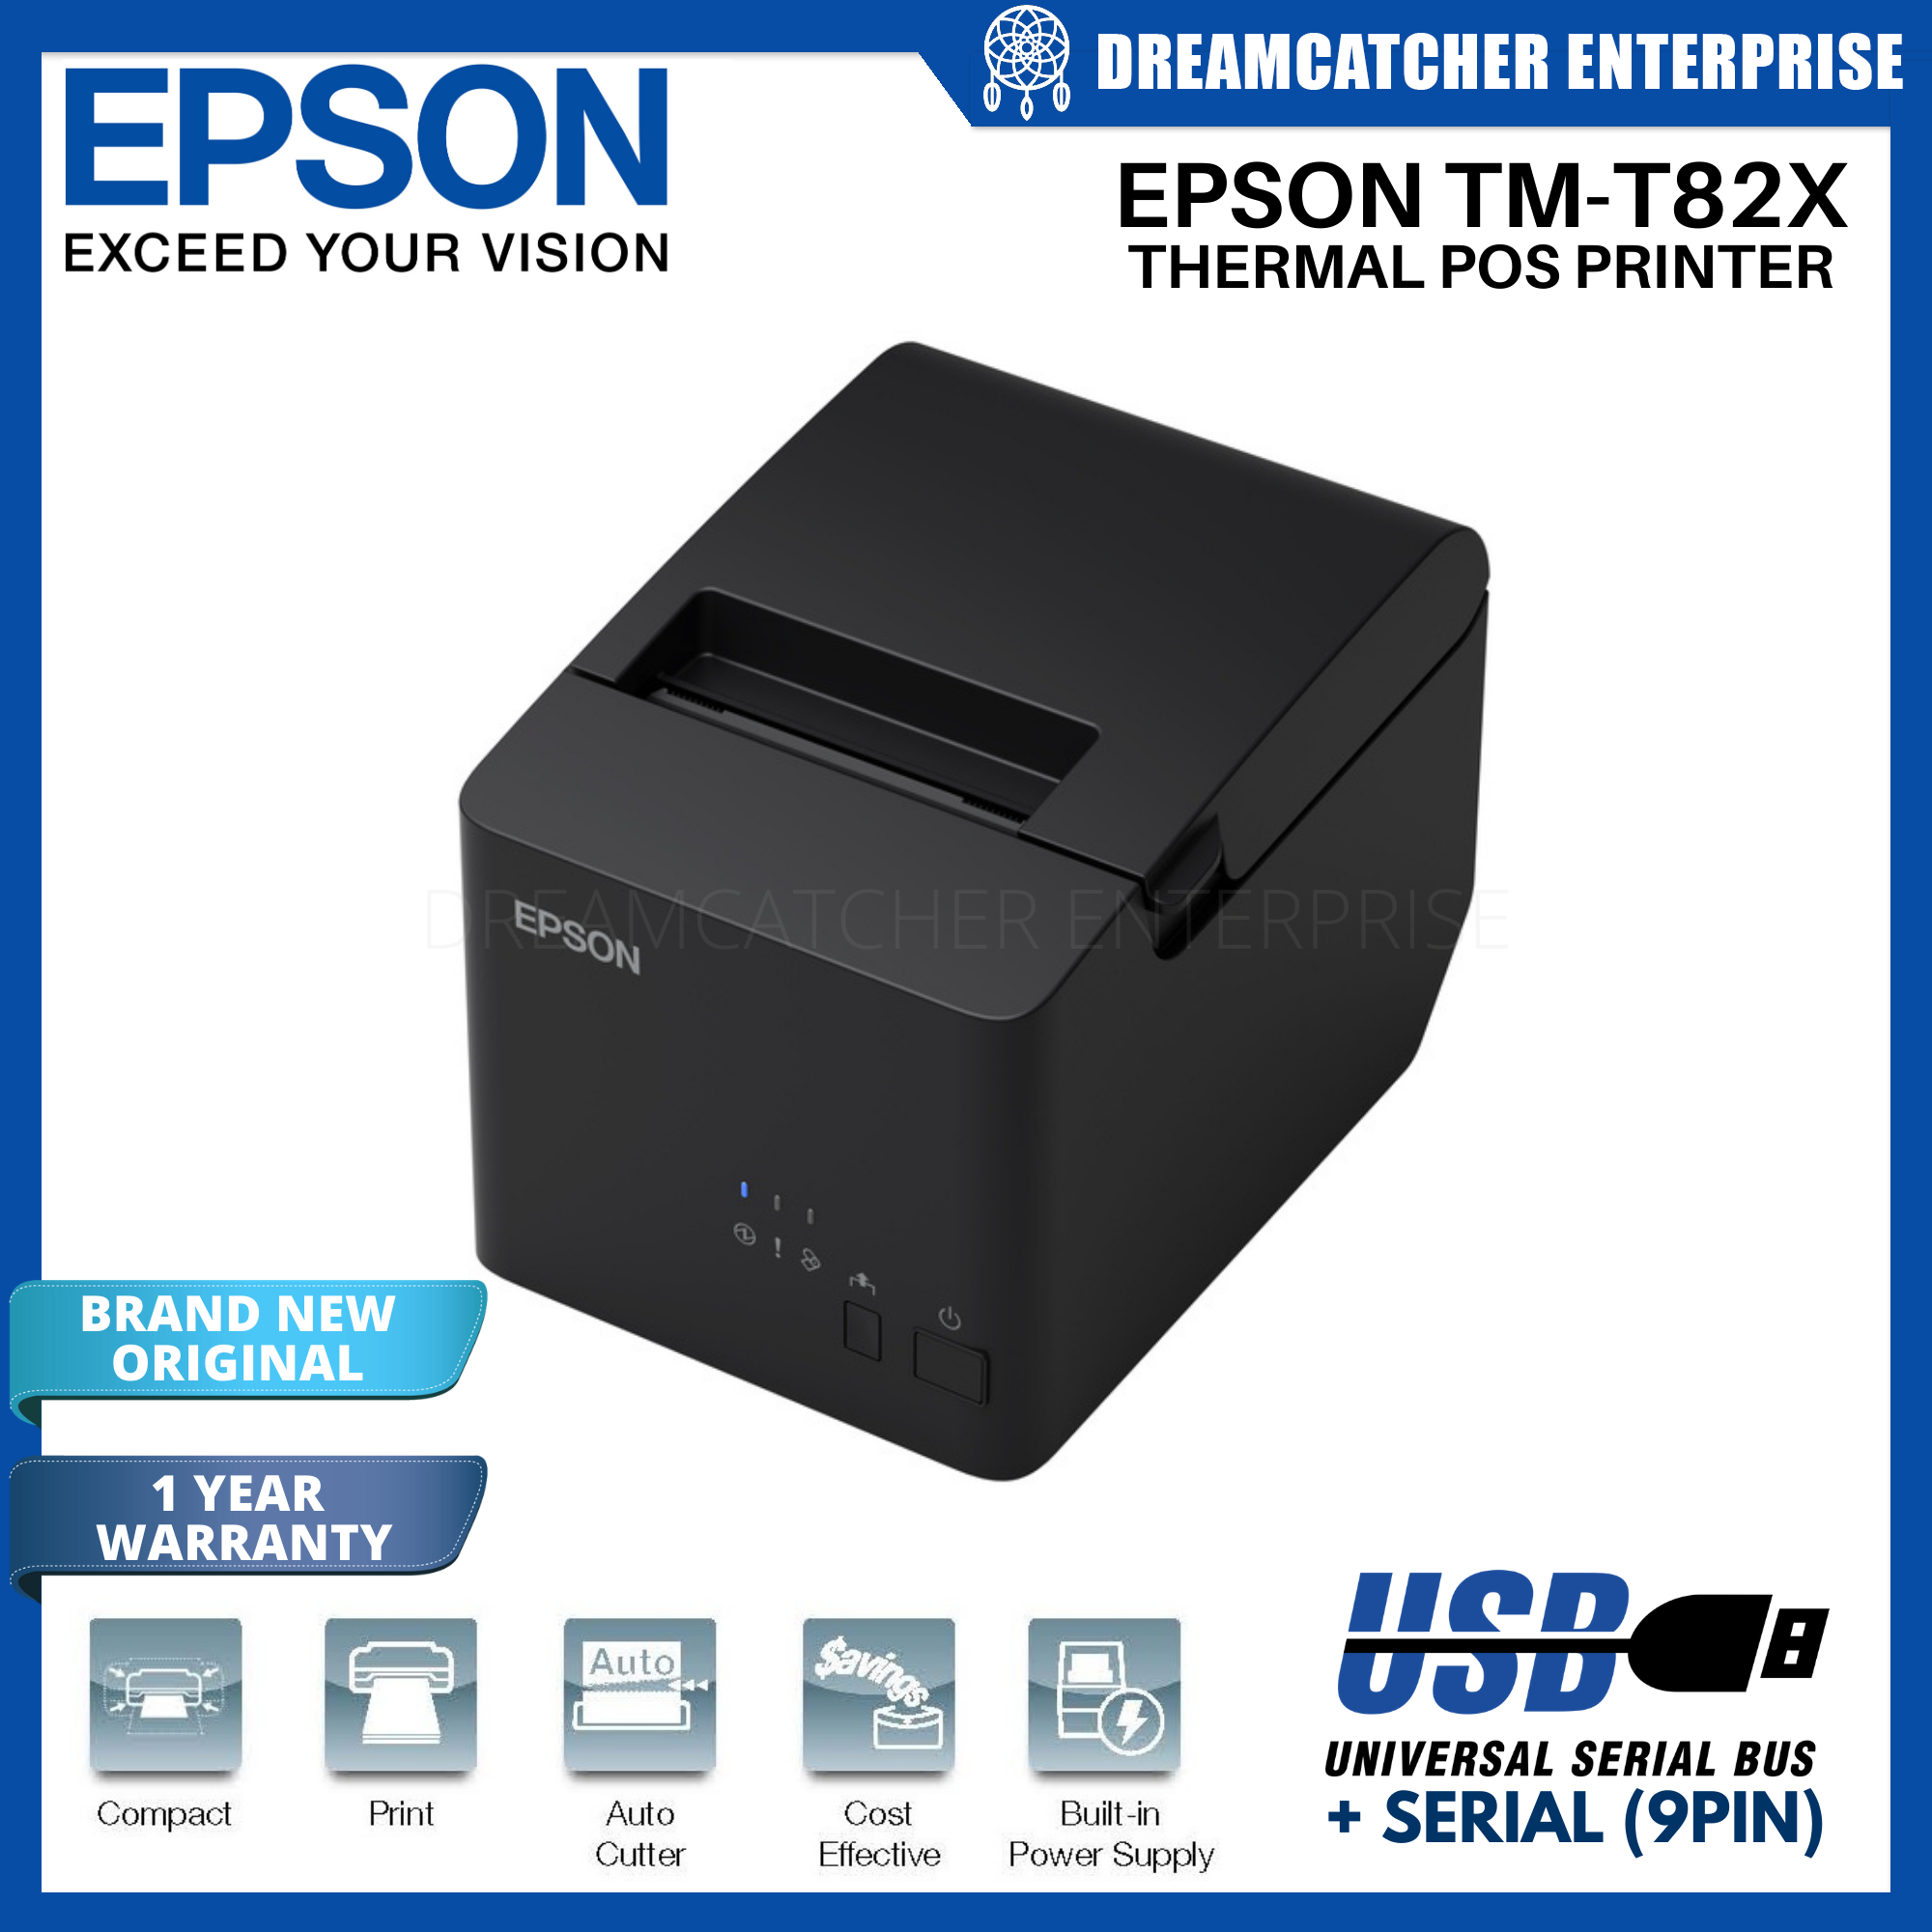 Epson Tm T82x Tm T82 Thermal Pos Printer Usb Serial 9 Pin Interface With Built In Power Supply 8079